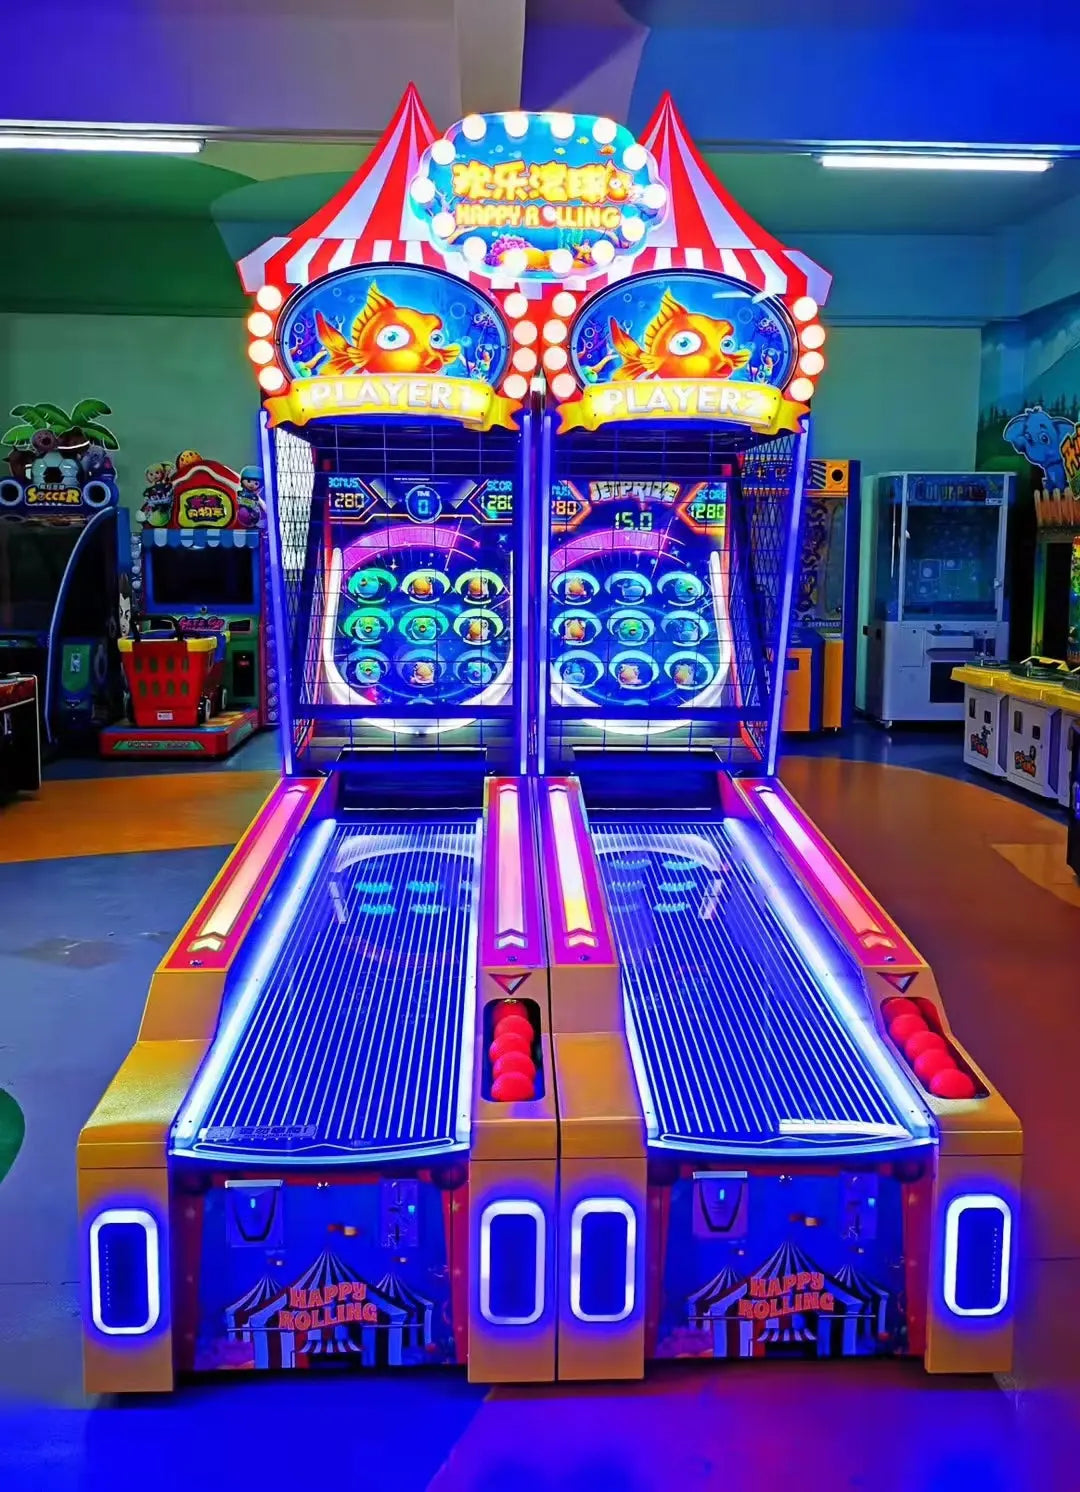 Happy-Rolling-bowling-sport-game-machine-Amusement-Coin-Operated-Electronic-Lottery-Ticket-Redemption-games-Tomy-Arcade